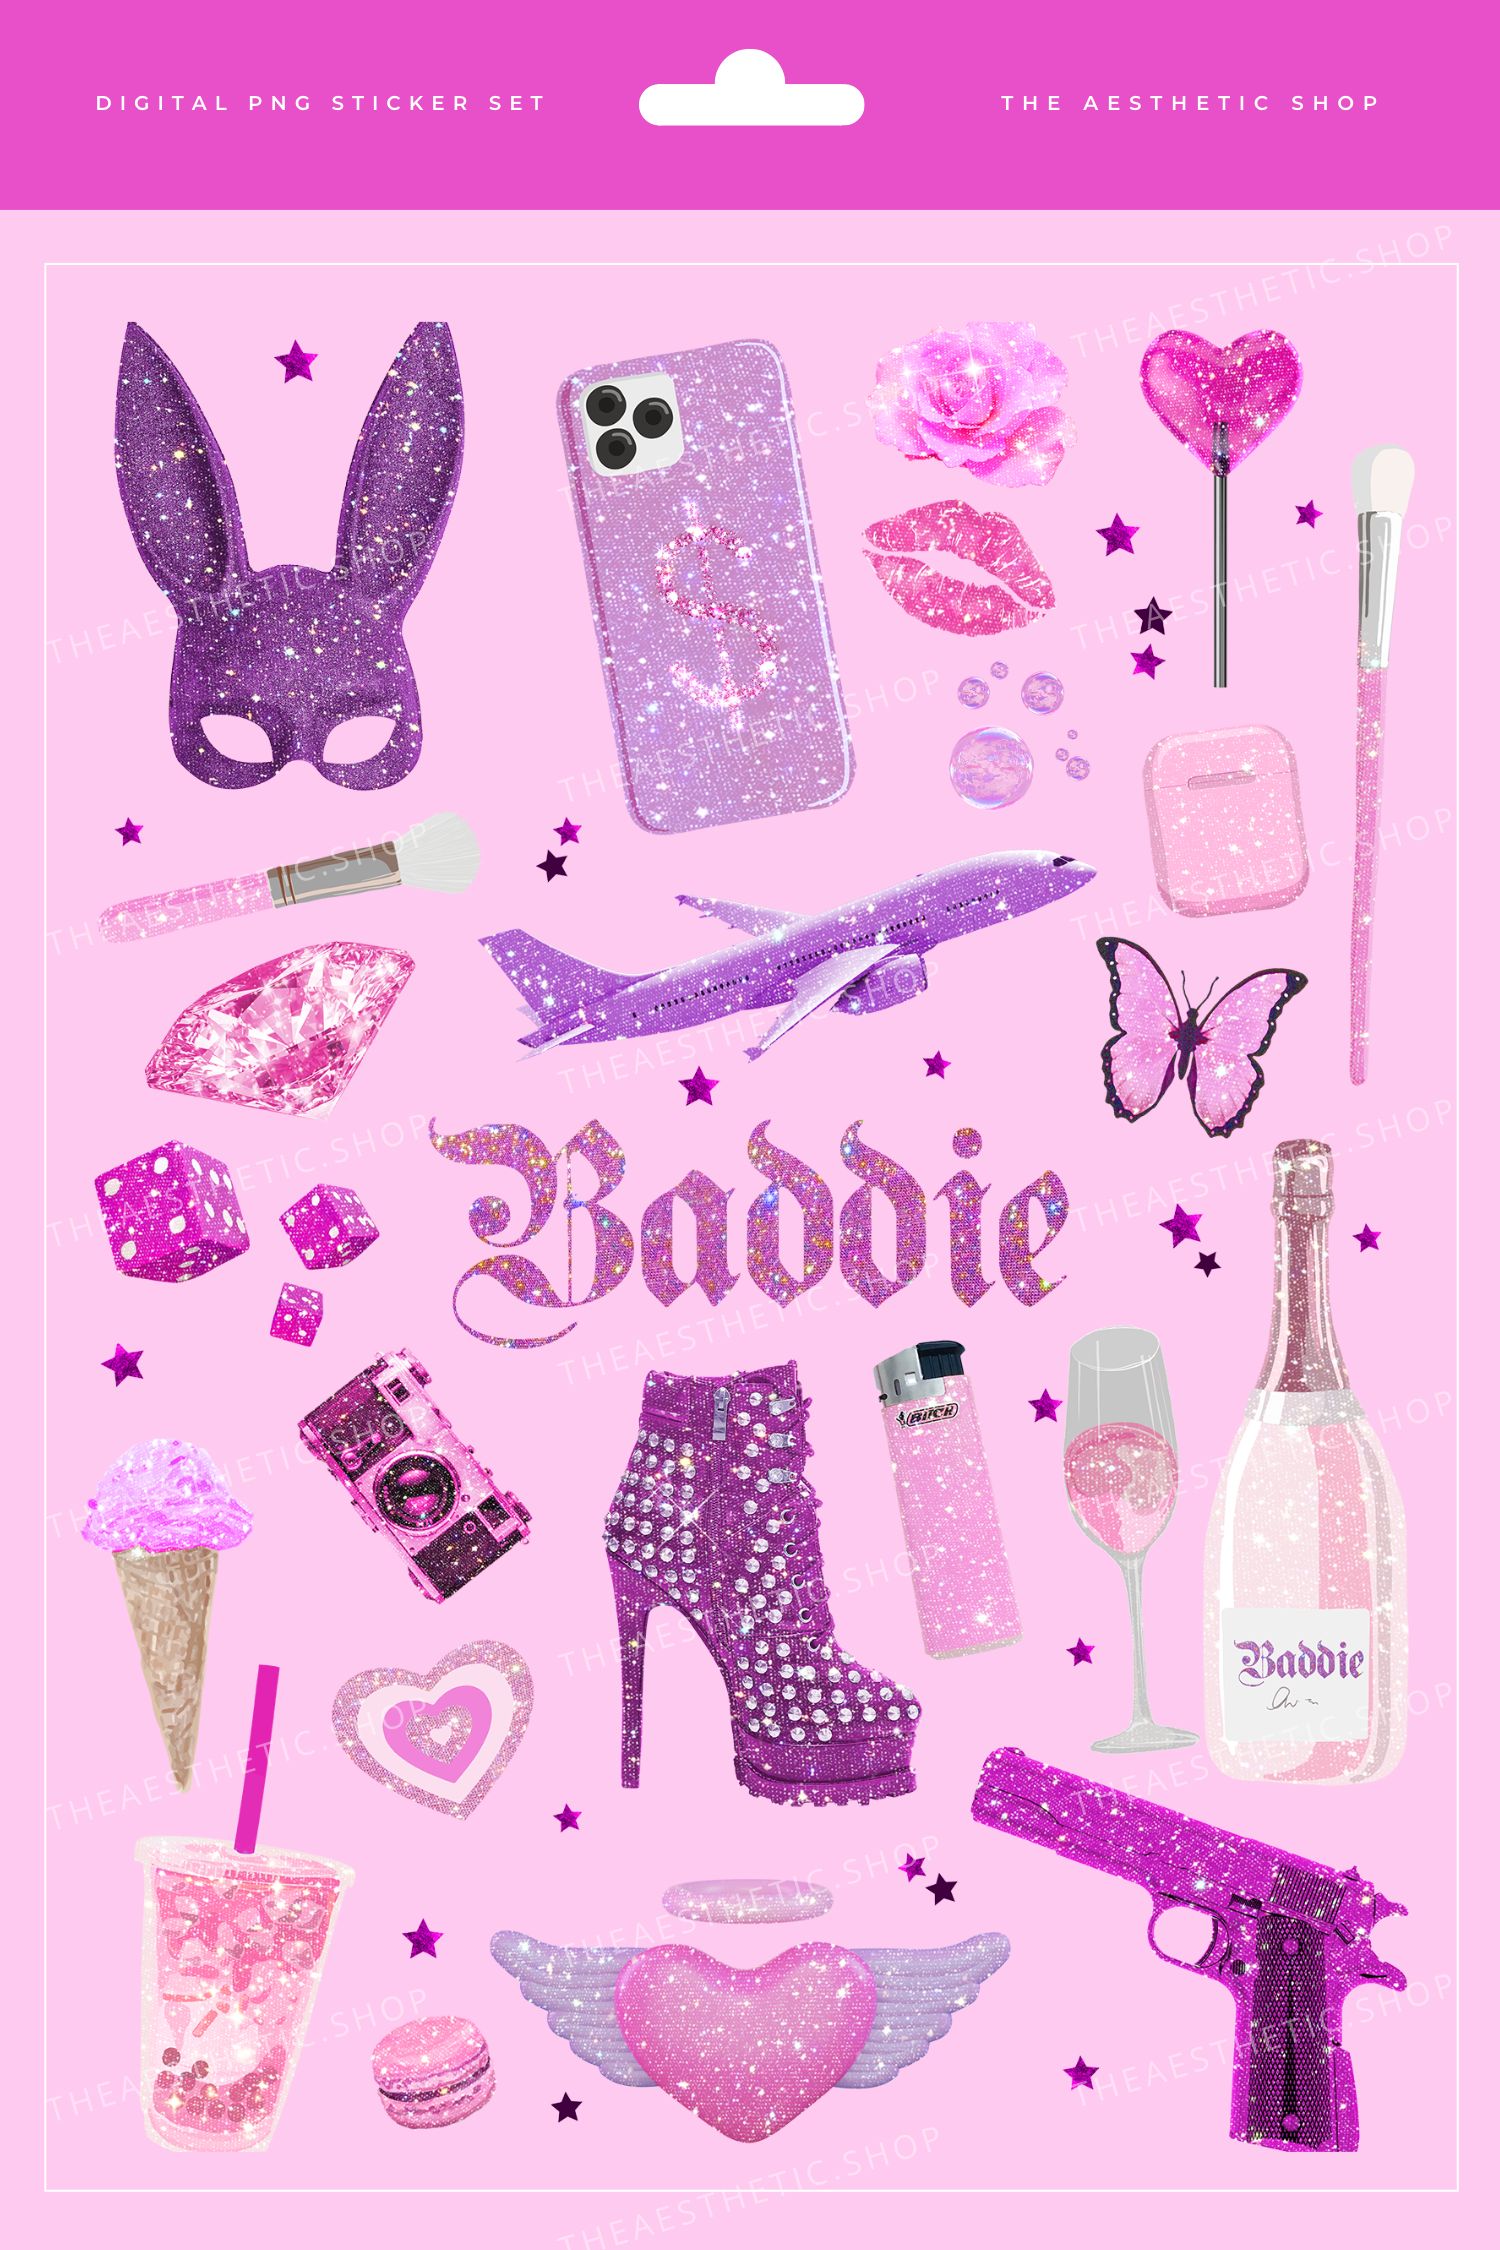 Baddie aesthetic transparent PNG sticker set ⋆ The Aesthetic Shop